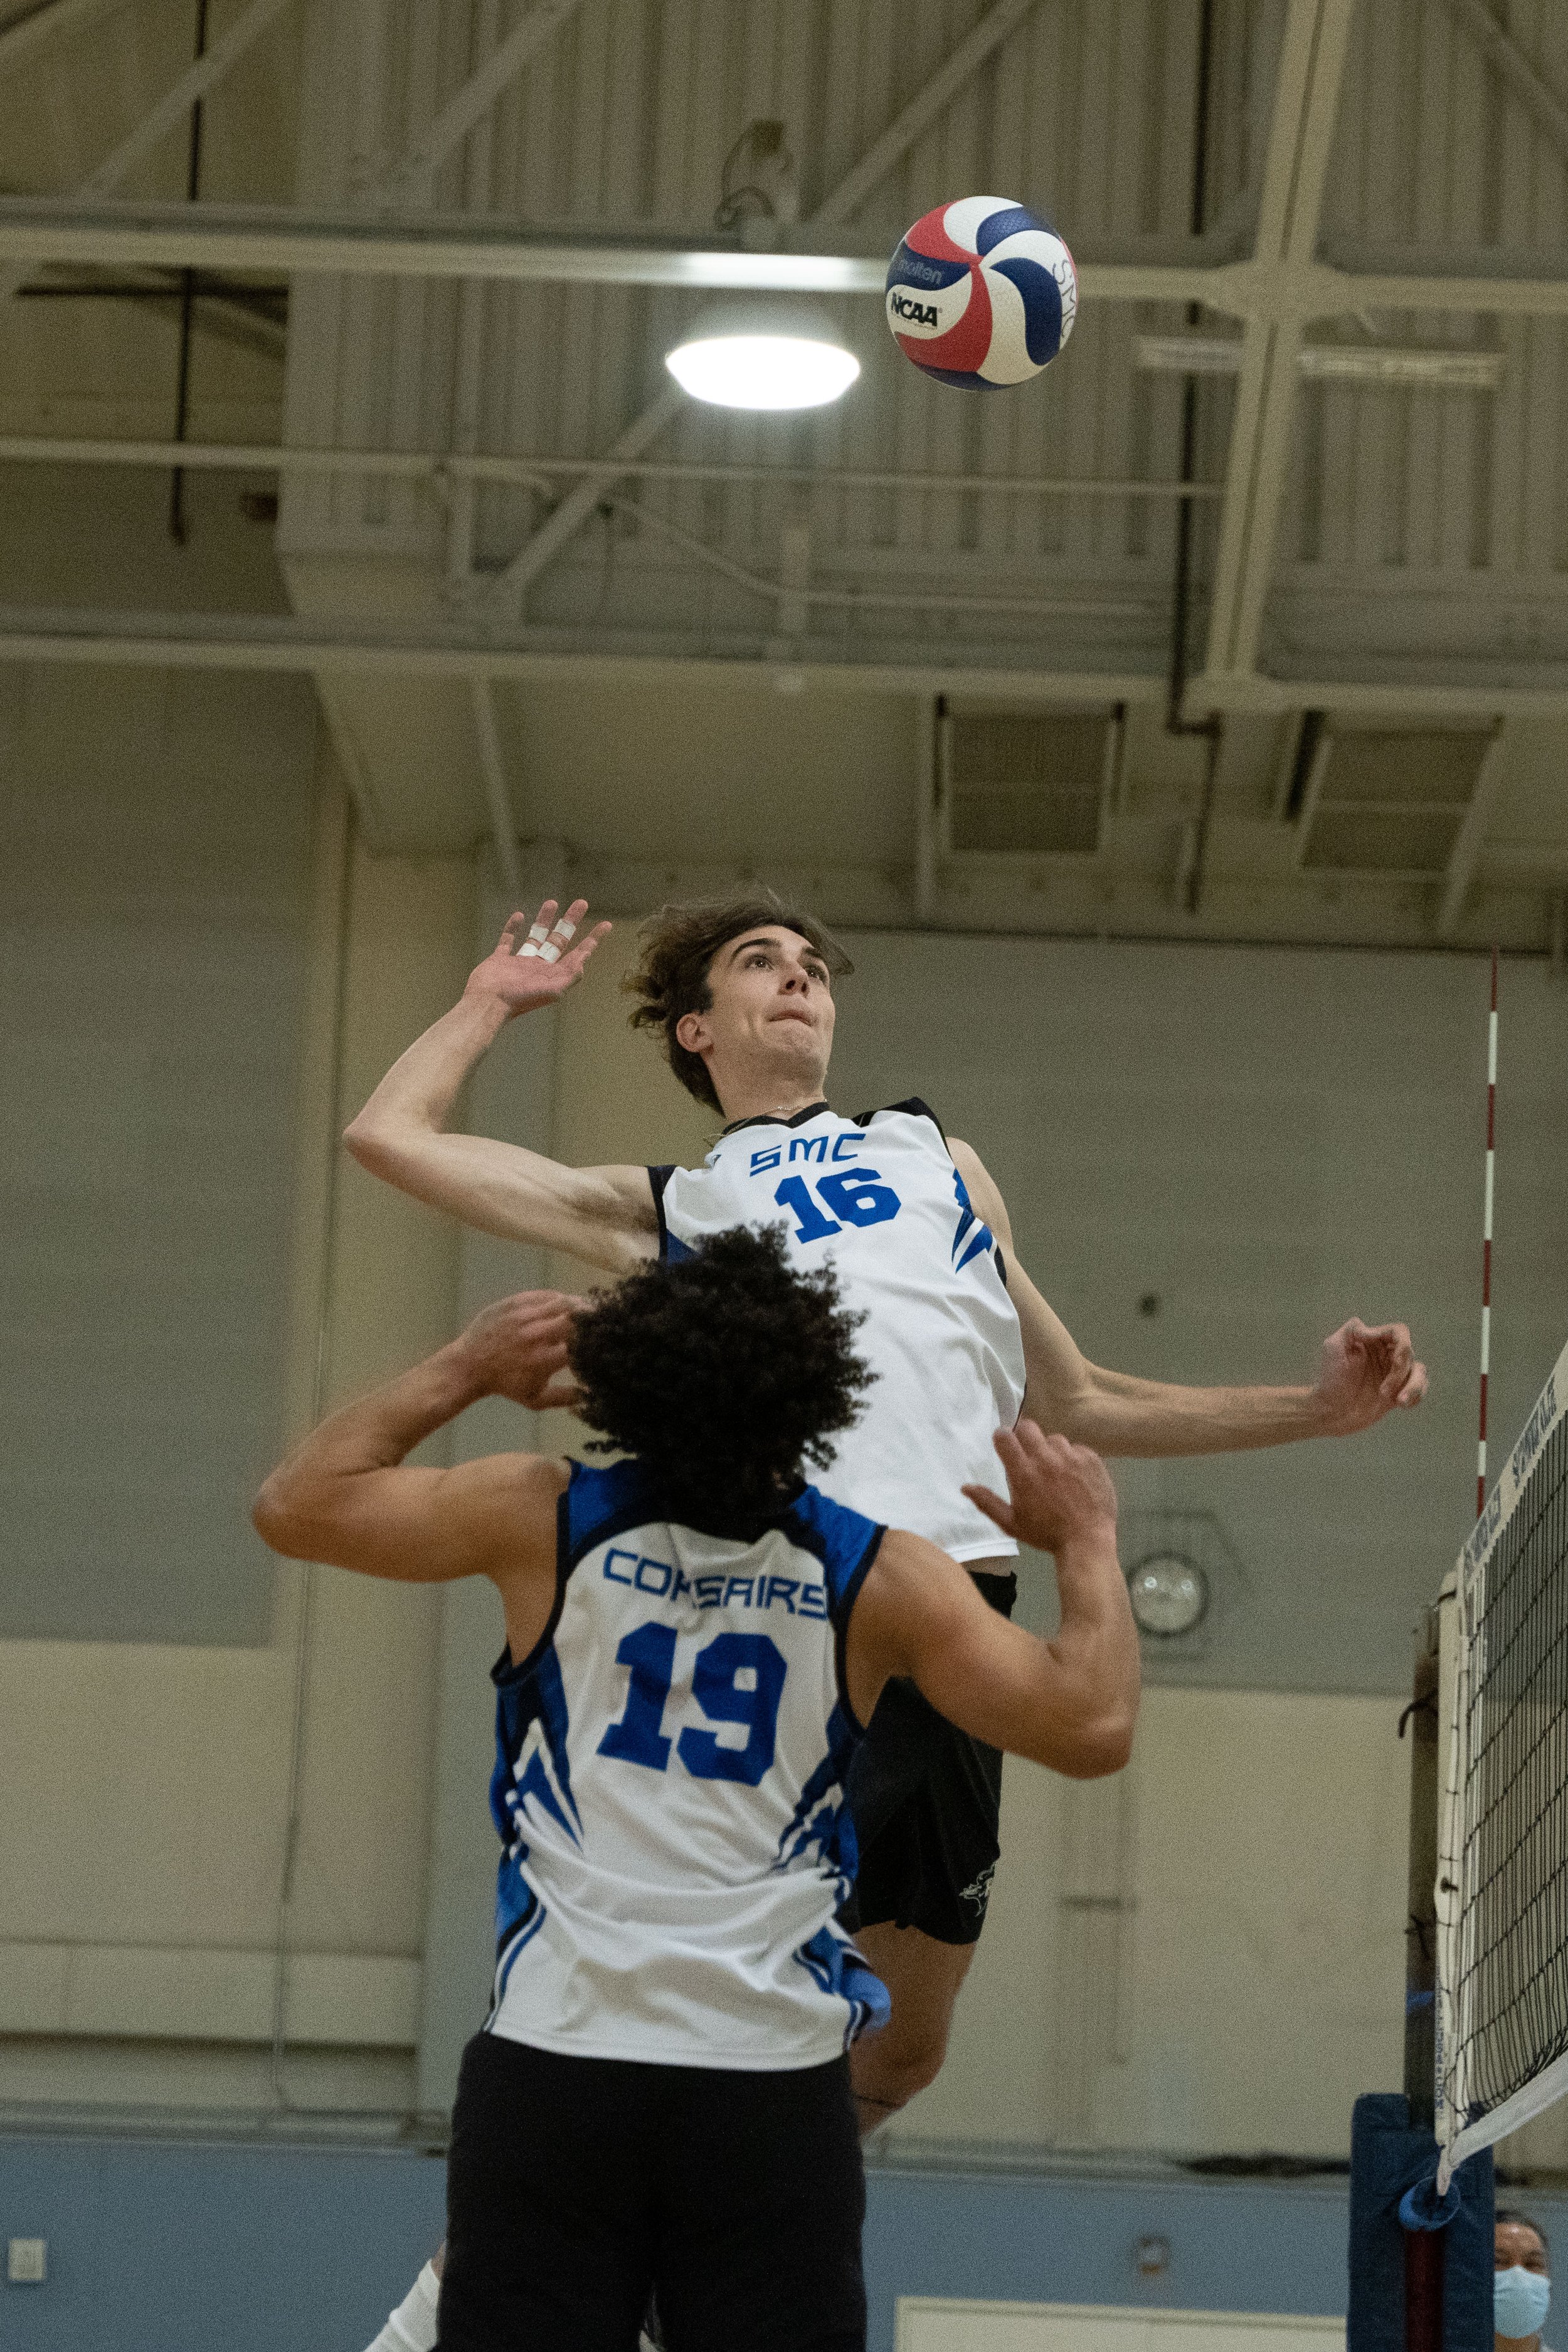  Santa Monica College Corsairs Freshman Grant Hall (16) prepares to spike the ball as his team- mate, Sophomore Elijah Chambers (19), watches during the game against the Moorpark College Raiders in The Pavilion in Santa Monica, Calif. on March 4. (Ry